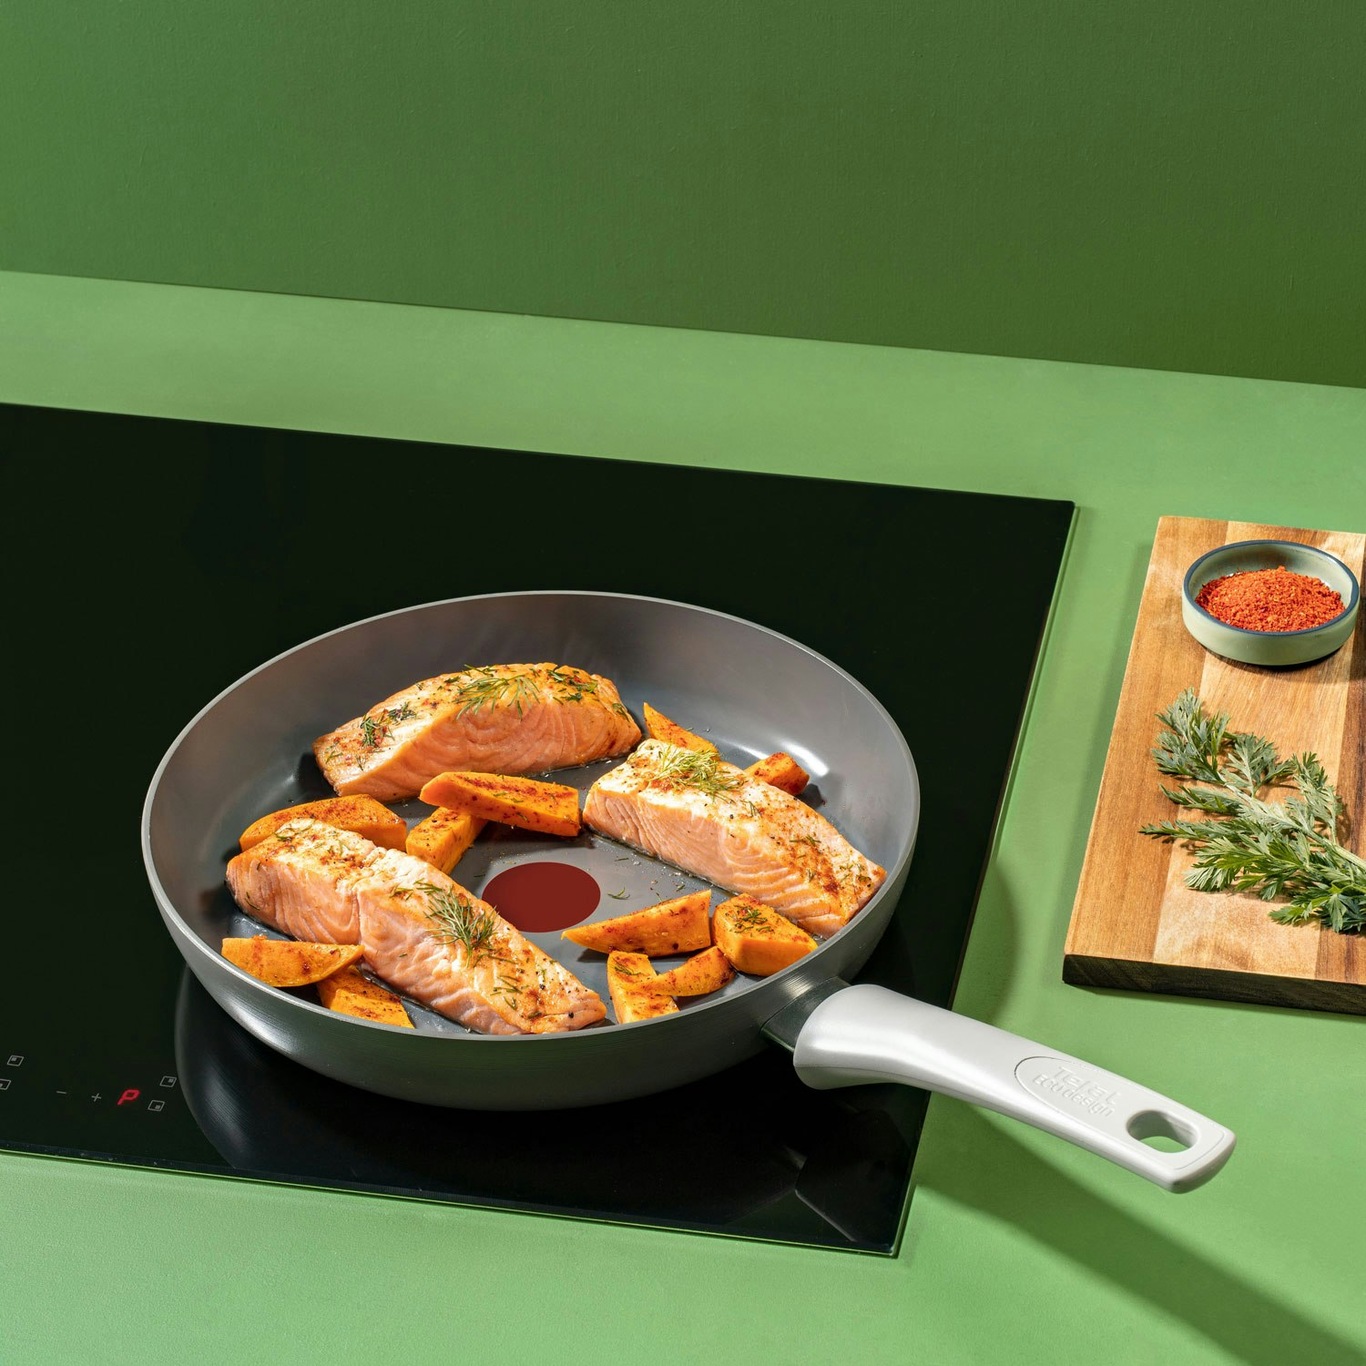 https://royaldesign.com/image/2/tefal-renew-on-frying-pan-2-pieces-1?w=800&quality=80